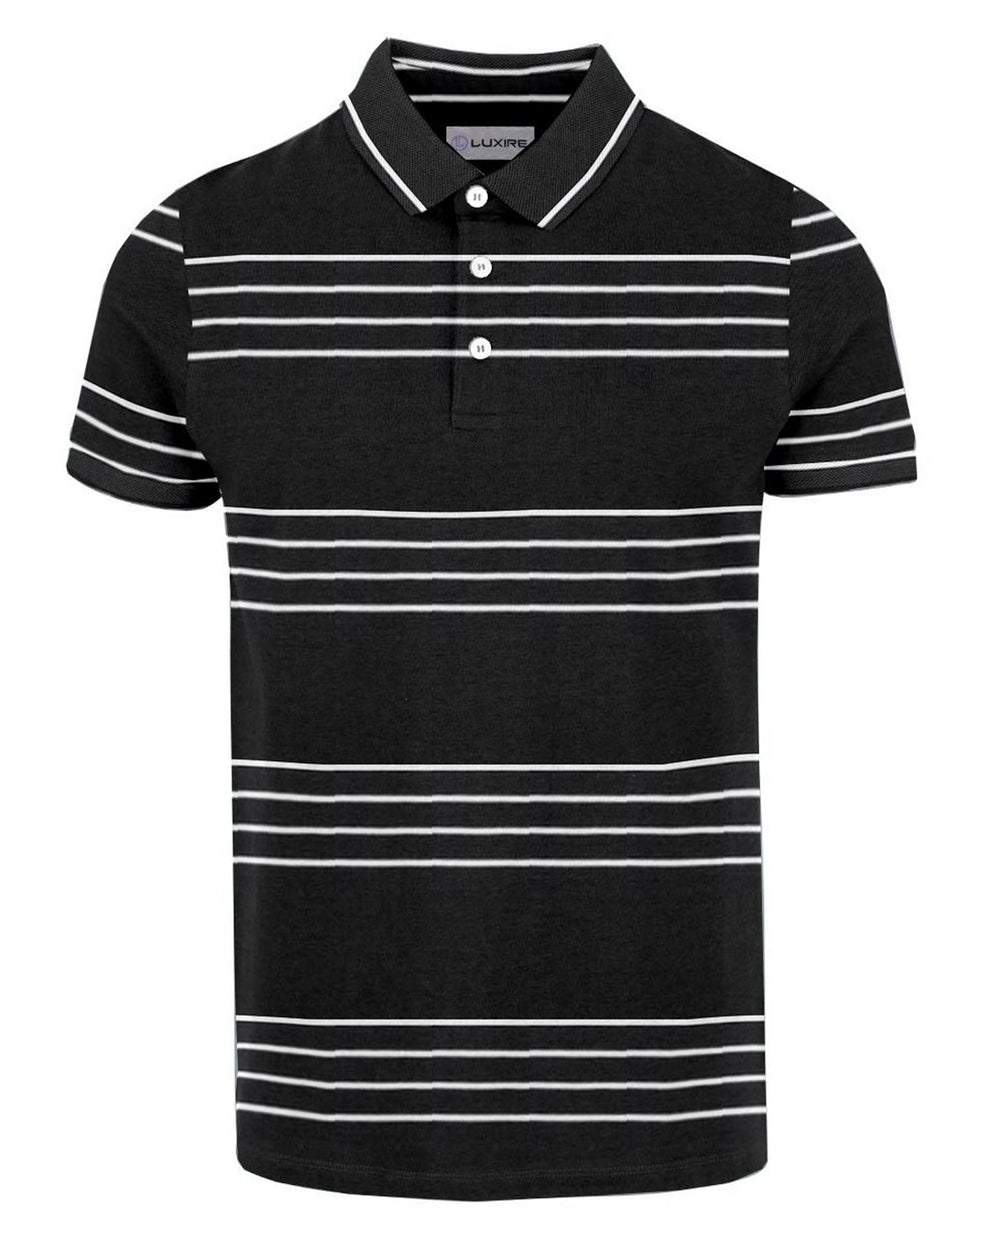 black and white striped polo t shirt